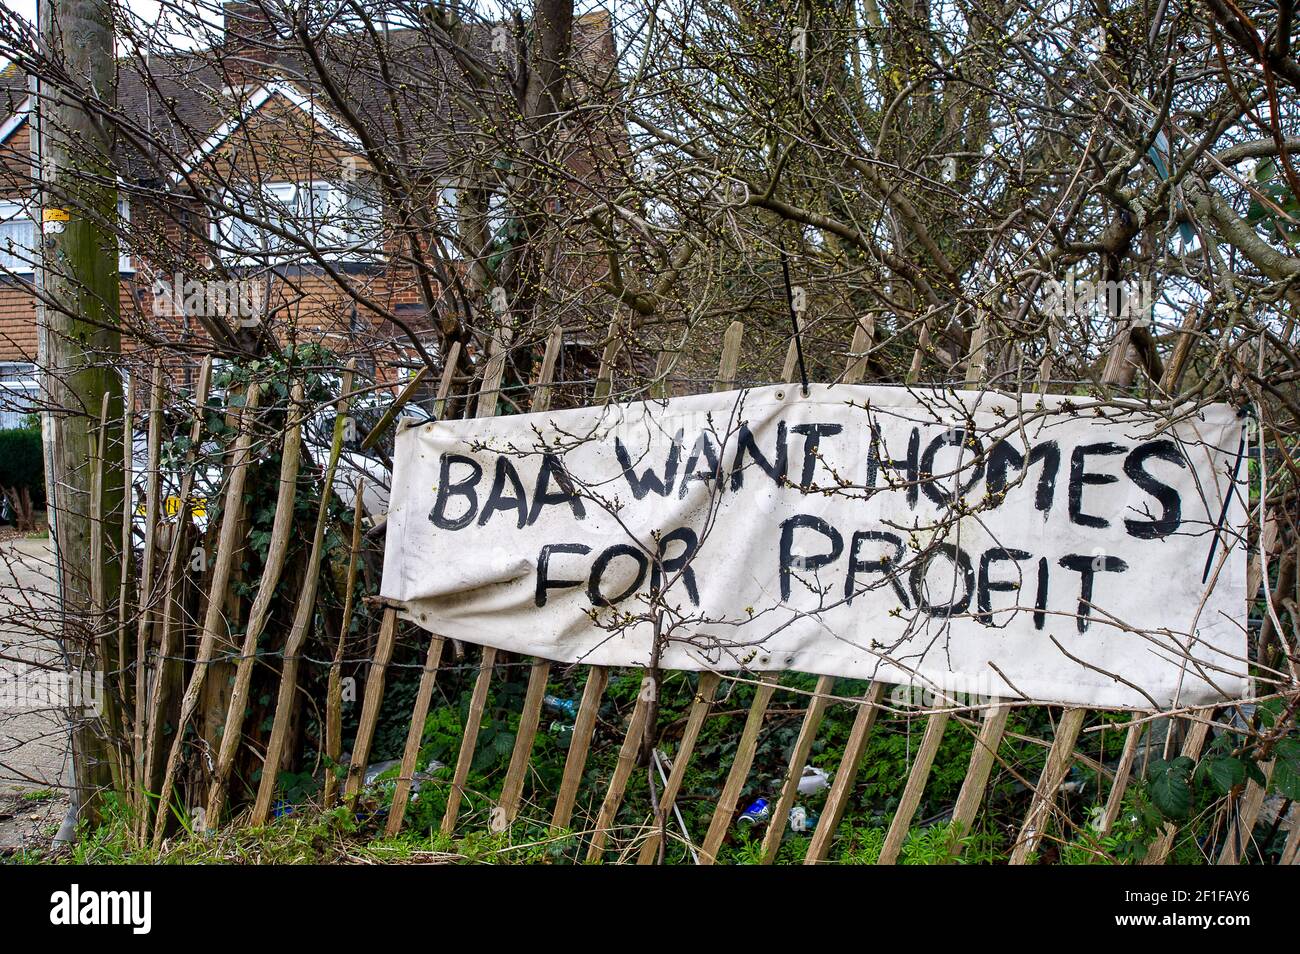 Sipson, UK. 8th March, 2021. A BBA Want Homes for Profit banner outside a house in Sipson. The fight by local residents and environmentalists to the stop the third runway at London Heathrow continues. Last year the Supreme Court reversed a decision to stop plans for a third runway at Heathrow Airport. Developers are now able to seek planning permission for the controversial third runway. Not only would the number of flights from London Heathrow increase dramatically but they would be flying at lower heights causing more noise and pollution to residents. Credit: Maureen McLean/Alamy Stock Photo